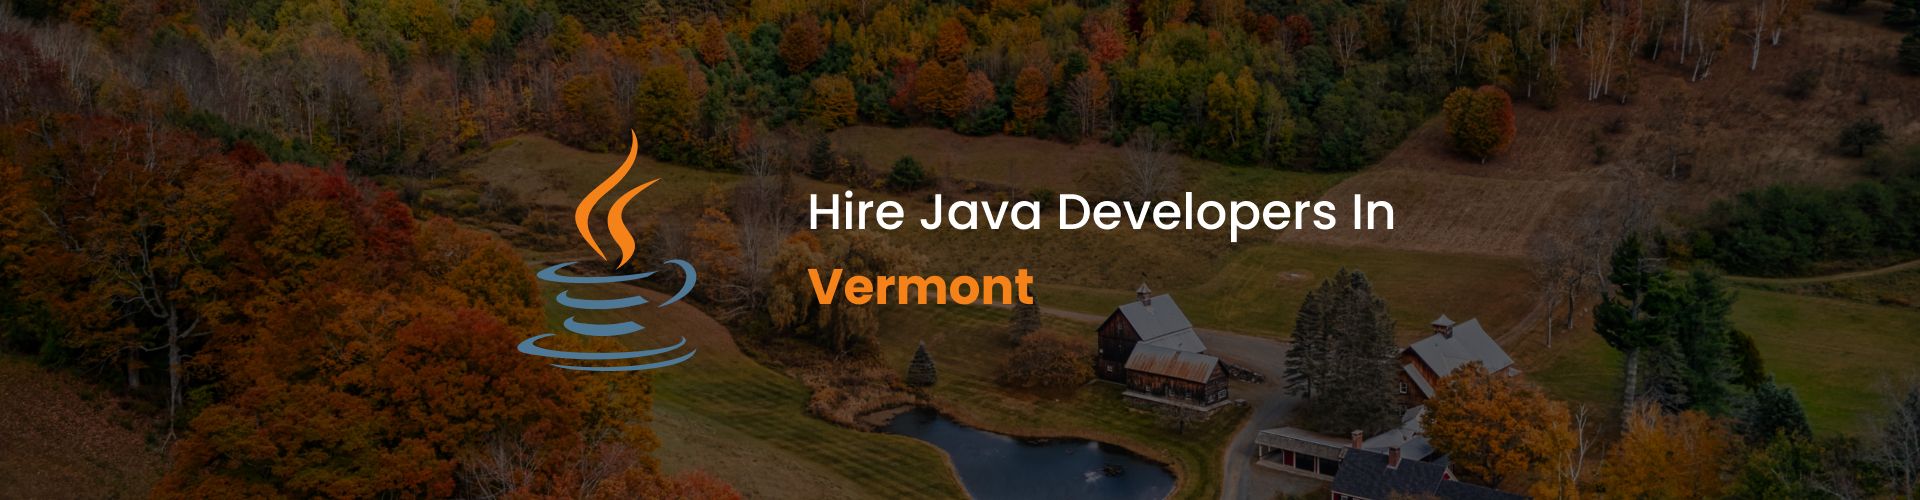 hire java developers in vermont